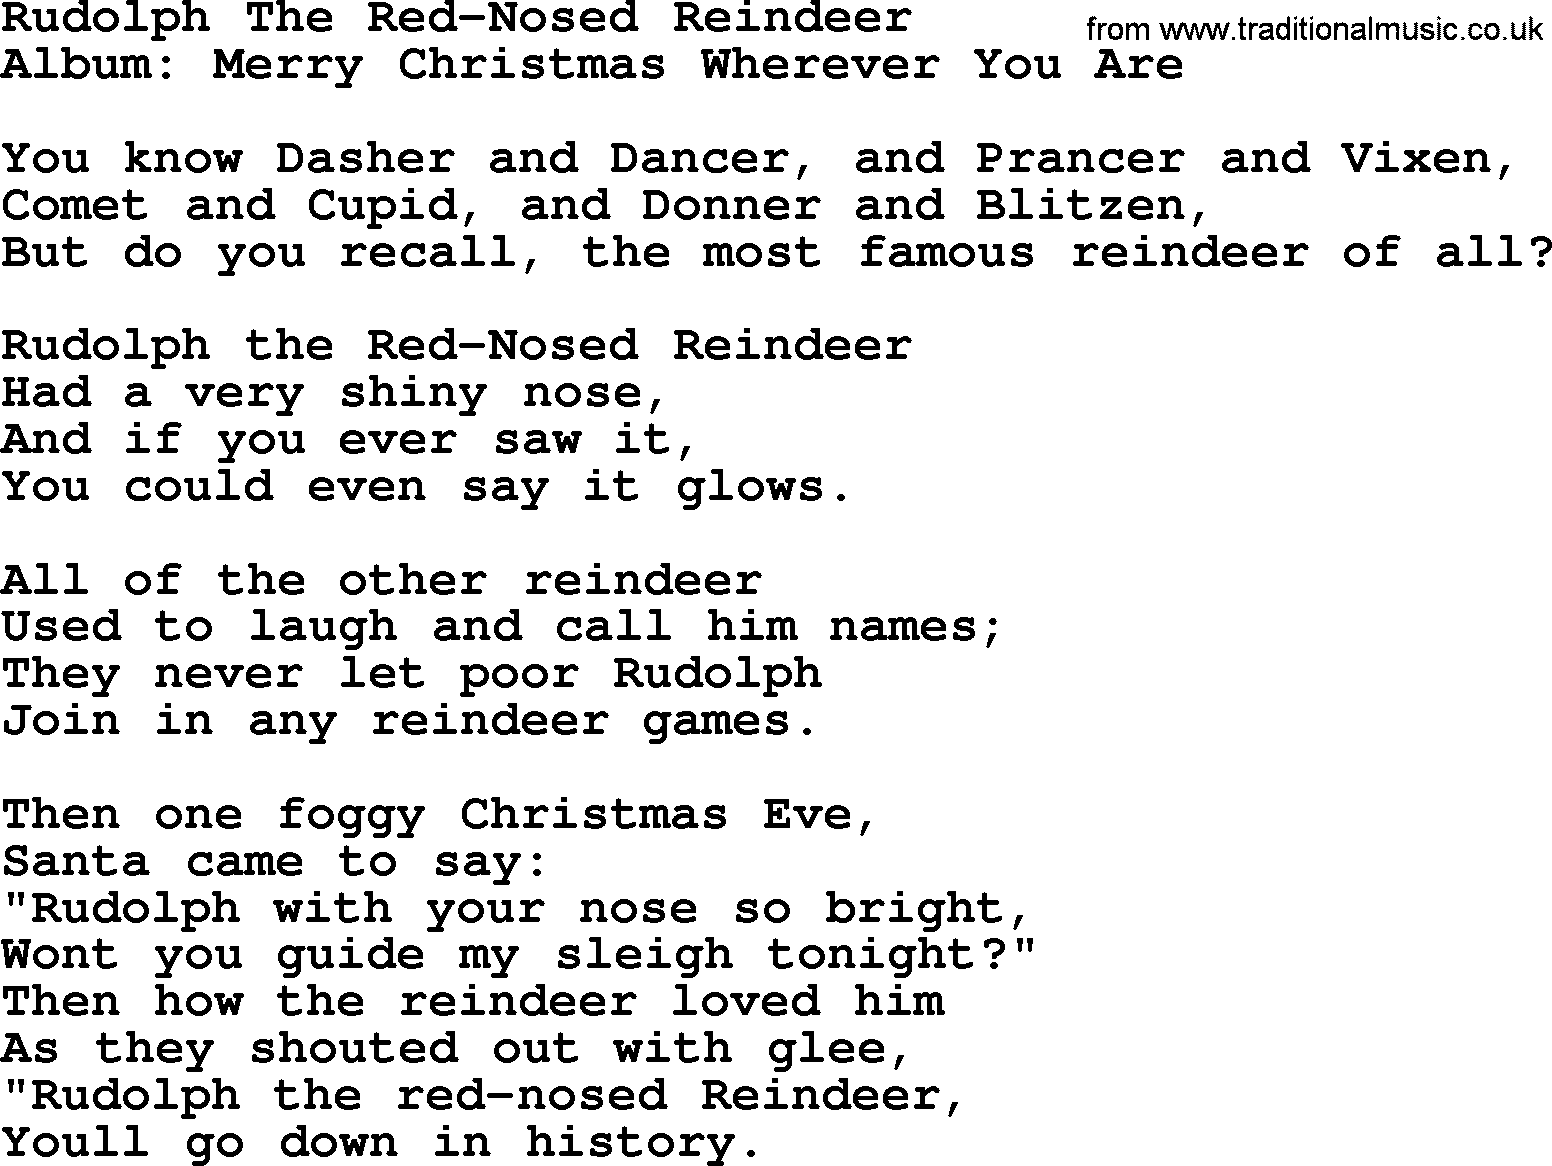 George Strait song: Rudolph The Red-Nosed Reindeer, lyrics